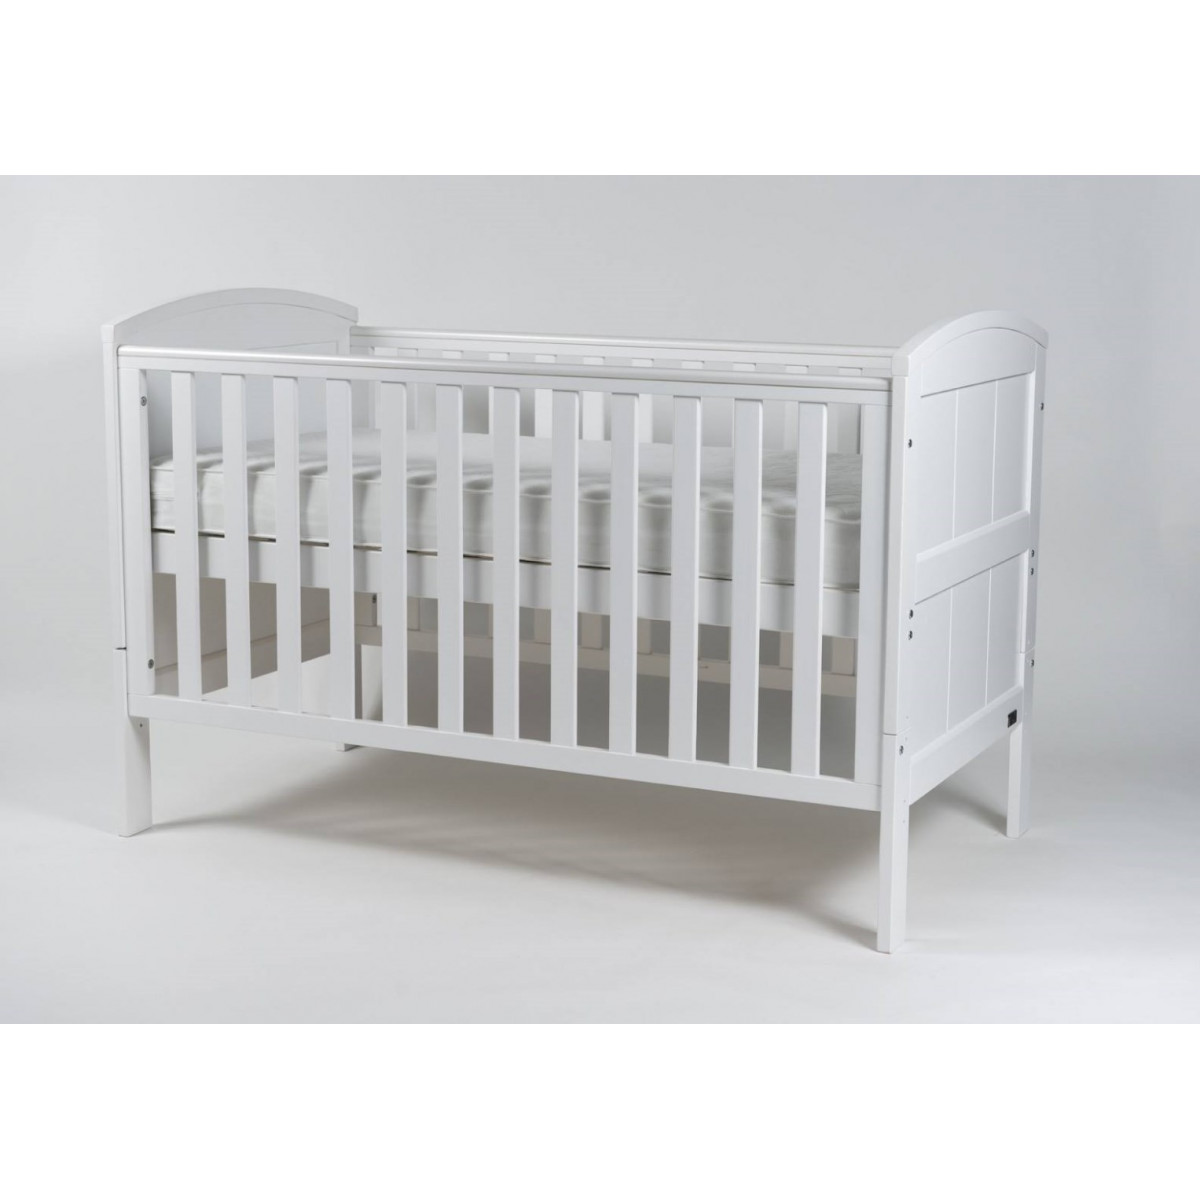 BR Baby Stockholm Cot Bed - White